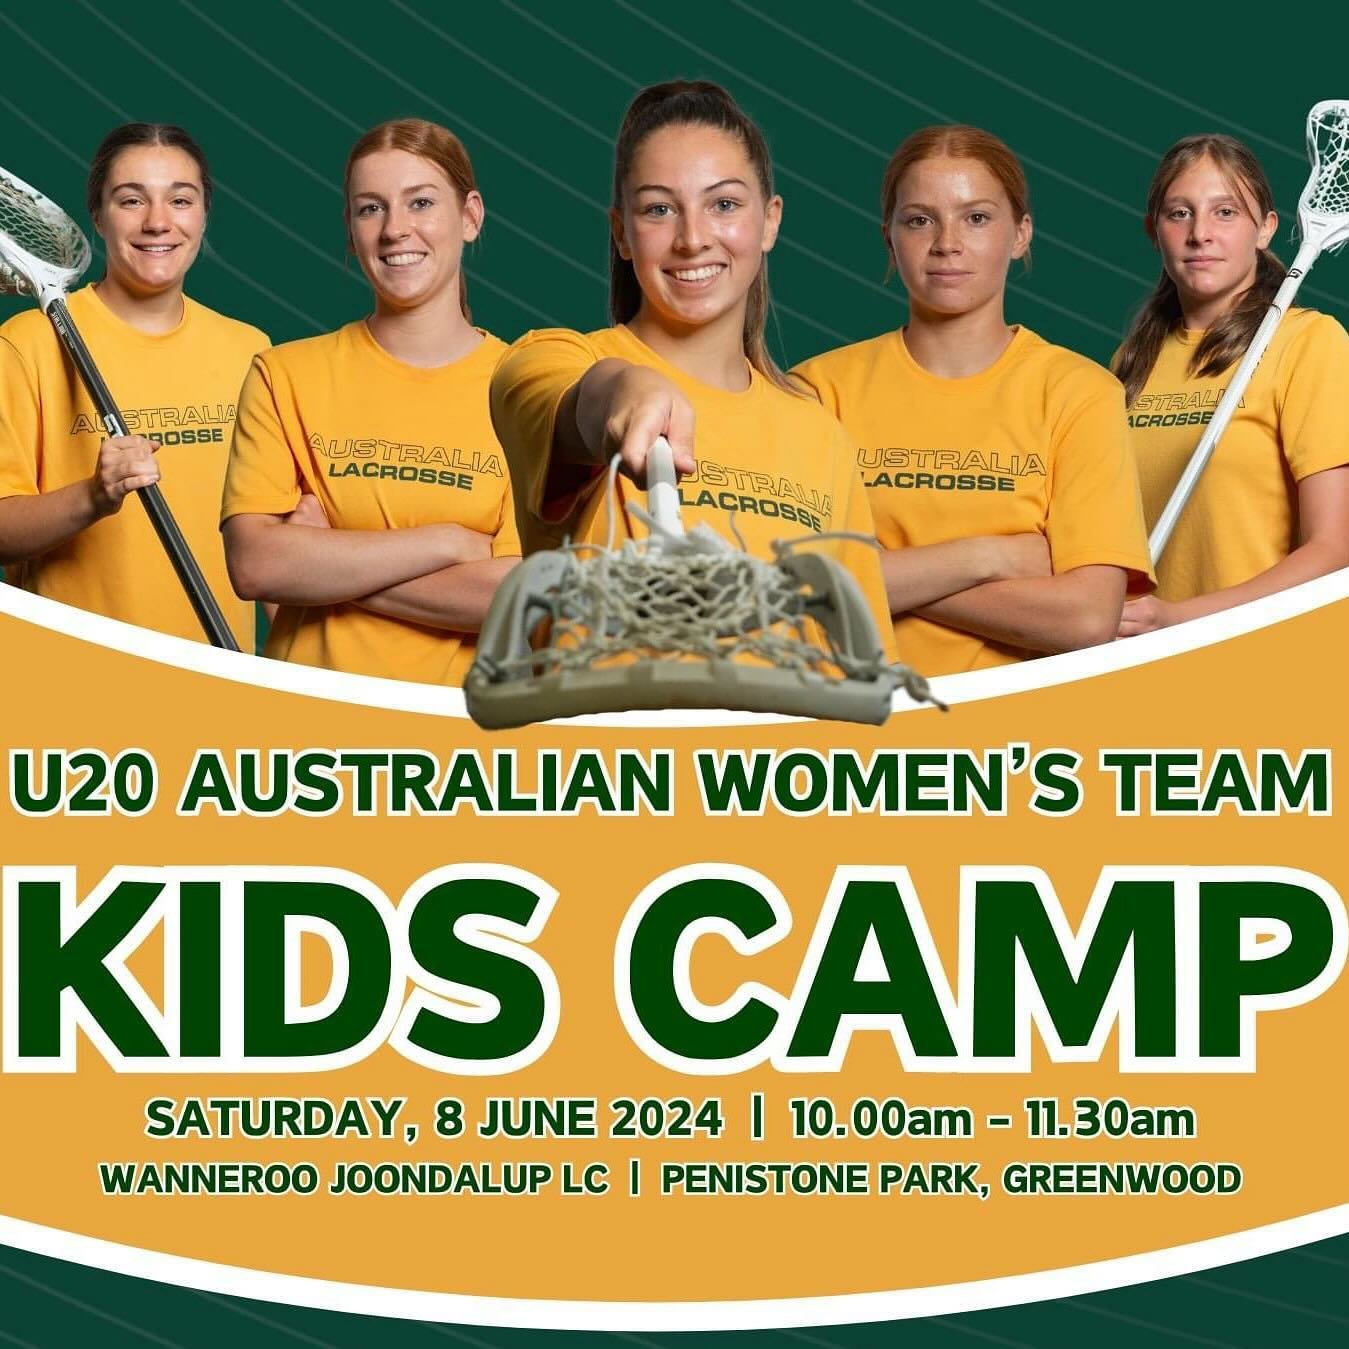 The U20 Australian Women&rsquo;s Team Kids Camp is a unique opportunity for young lacrosse players, both boys and girls, aged 8 - 15 to learn from Australia&rsquo;s next generation of lacrosse stars as they prepare to represent Australia at the World